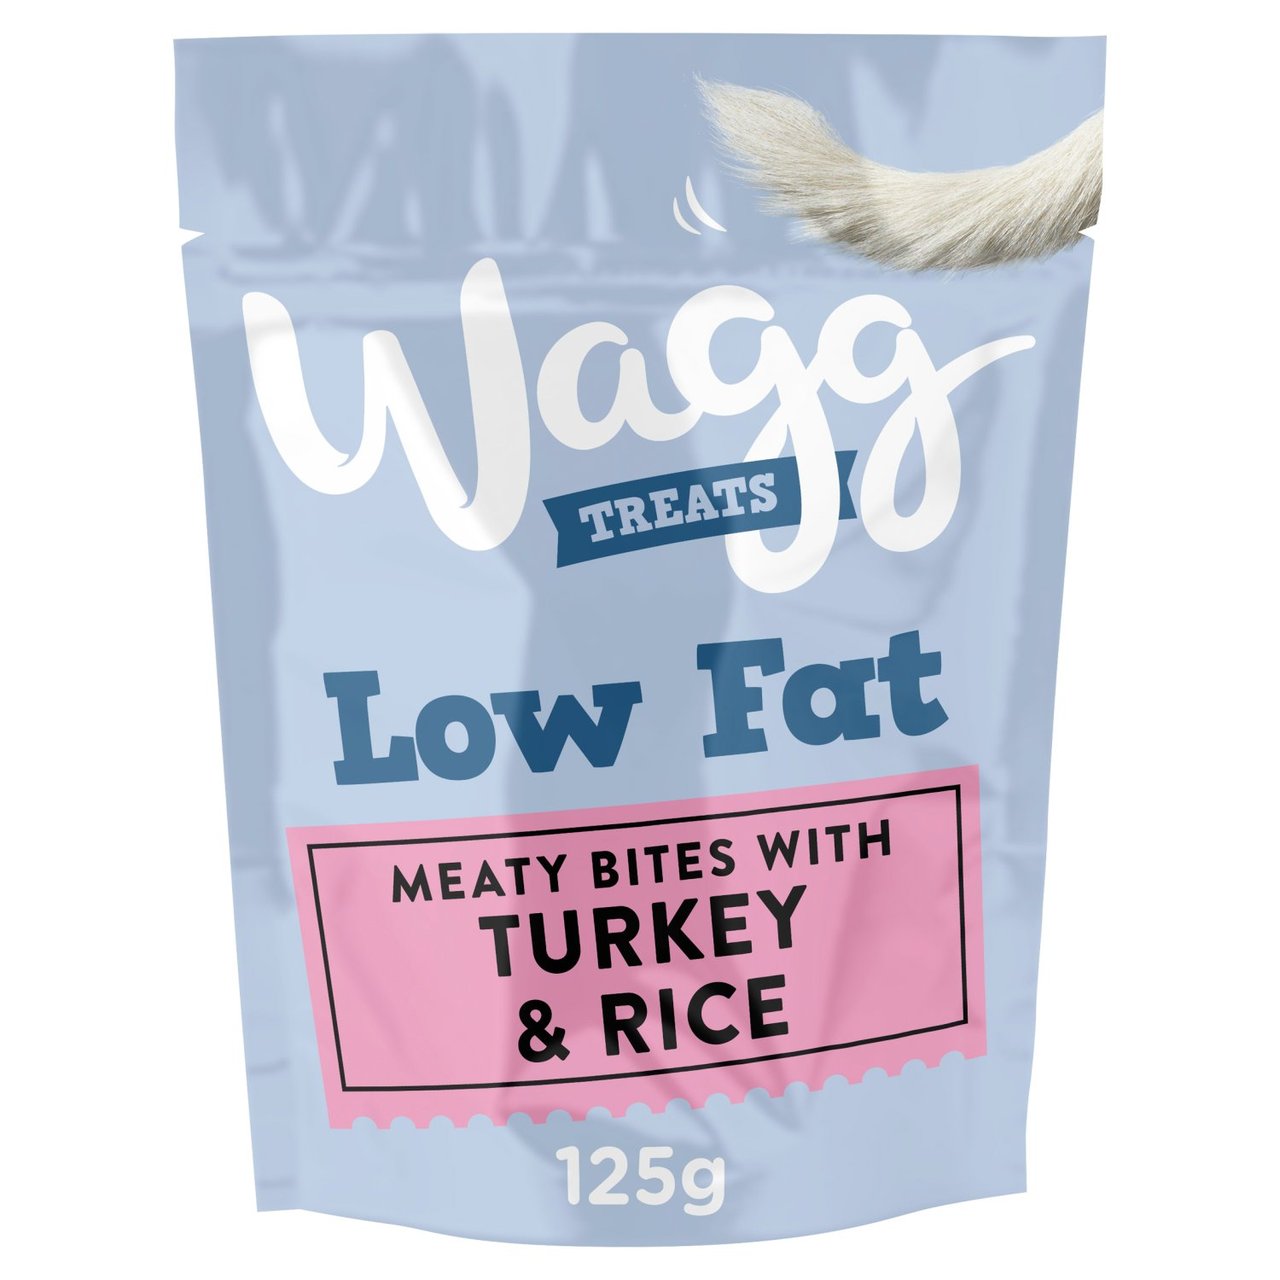 An image of Wagg Low Fat Treats with Turkey & Rice